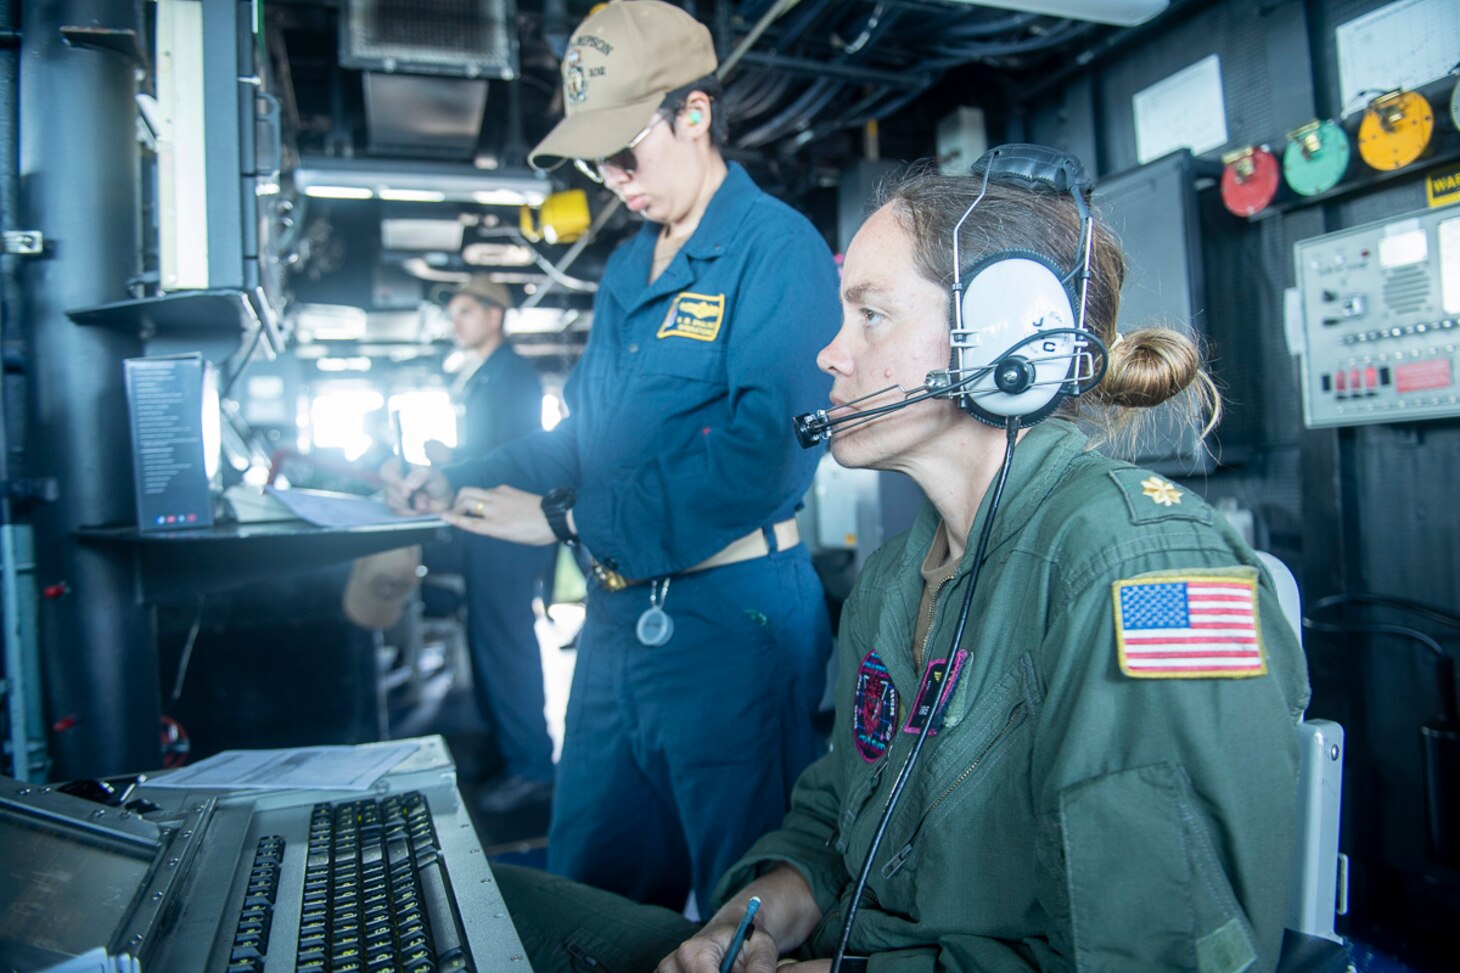 220426-N-CD319-1052 TAIWAN STRAIT (APR. 26, 2022) Lt. Cmdr. Kristina Mullins stands watch on the bridge aboard the Arleigh Burke-class guided-missile destroyer USS Sampson (DDG 102) while it transits the Taiwan Strait. USS Sampson is forward-deployed to the U.S. 7th Fleet area of operations in support of a free and open Indo-Pacific. (U.S. Navy photo by Mass Communications Specialist 3rd Class Tristan Cookson)